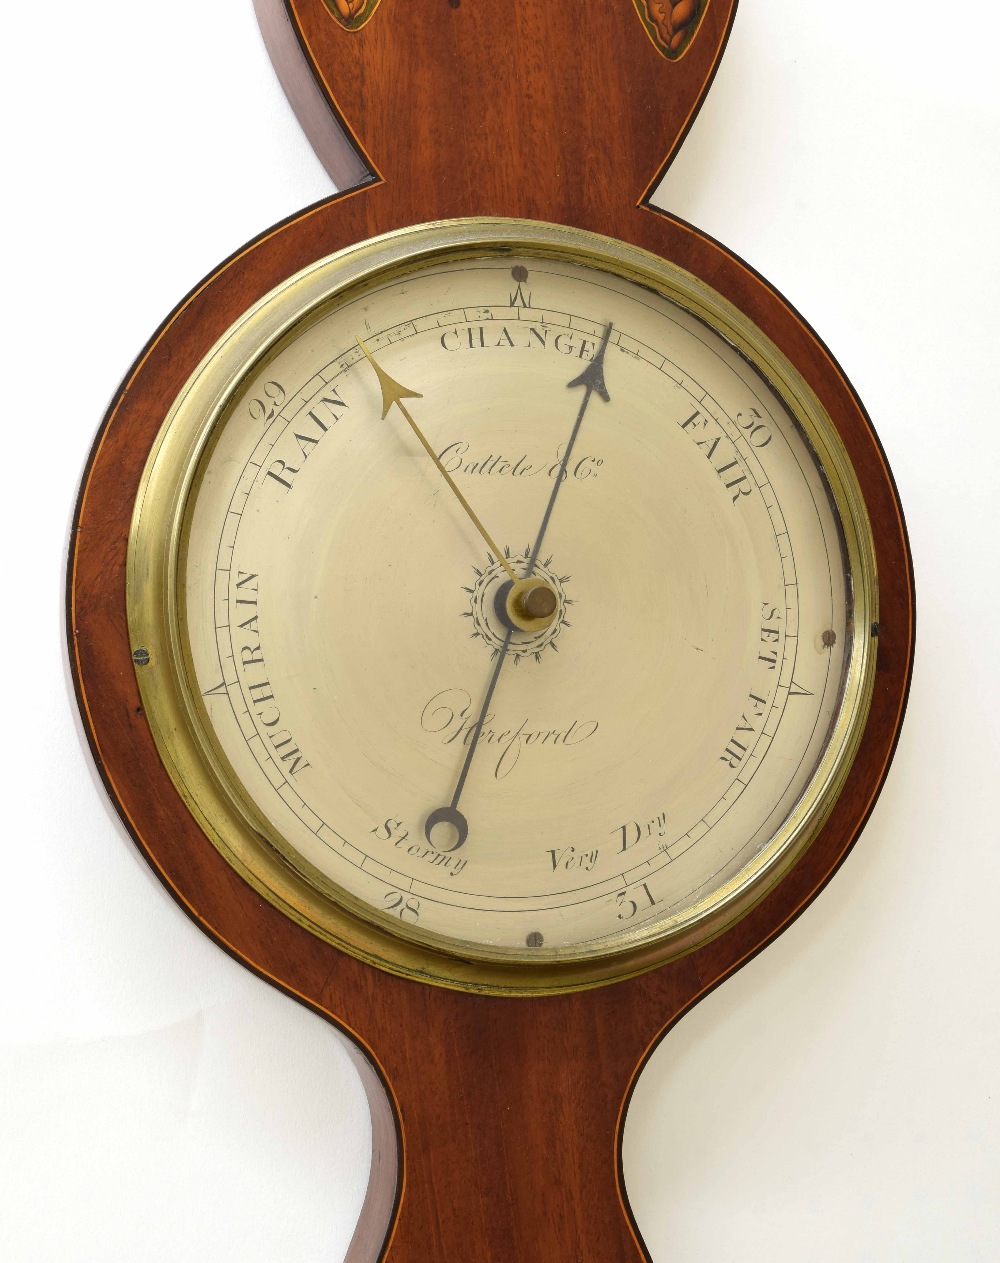 Mahogany inlaid banjo barometer/thermometer, the principal 8" silvered dial signed Cattele & Co, - Image 3 of 3